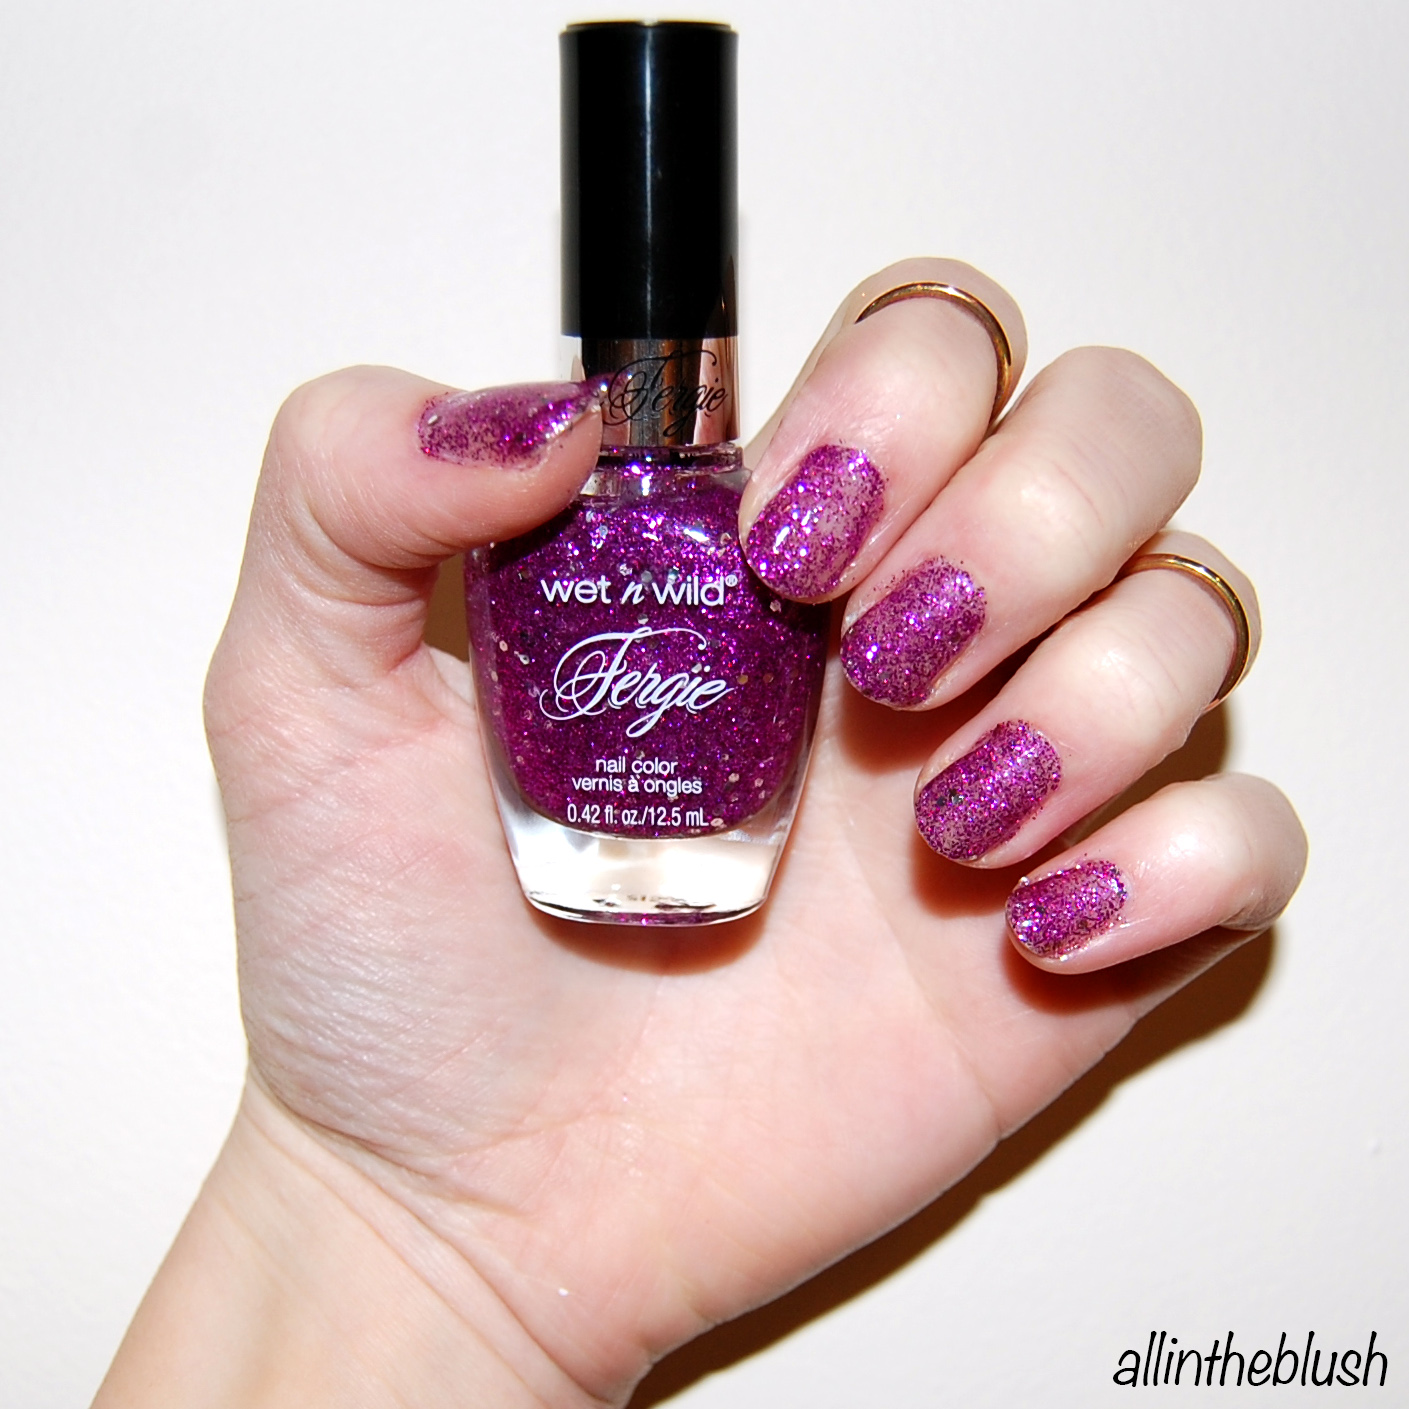 Lookbook: Wet n Wild Fast Dry Nail Color Swatches, New for 2011